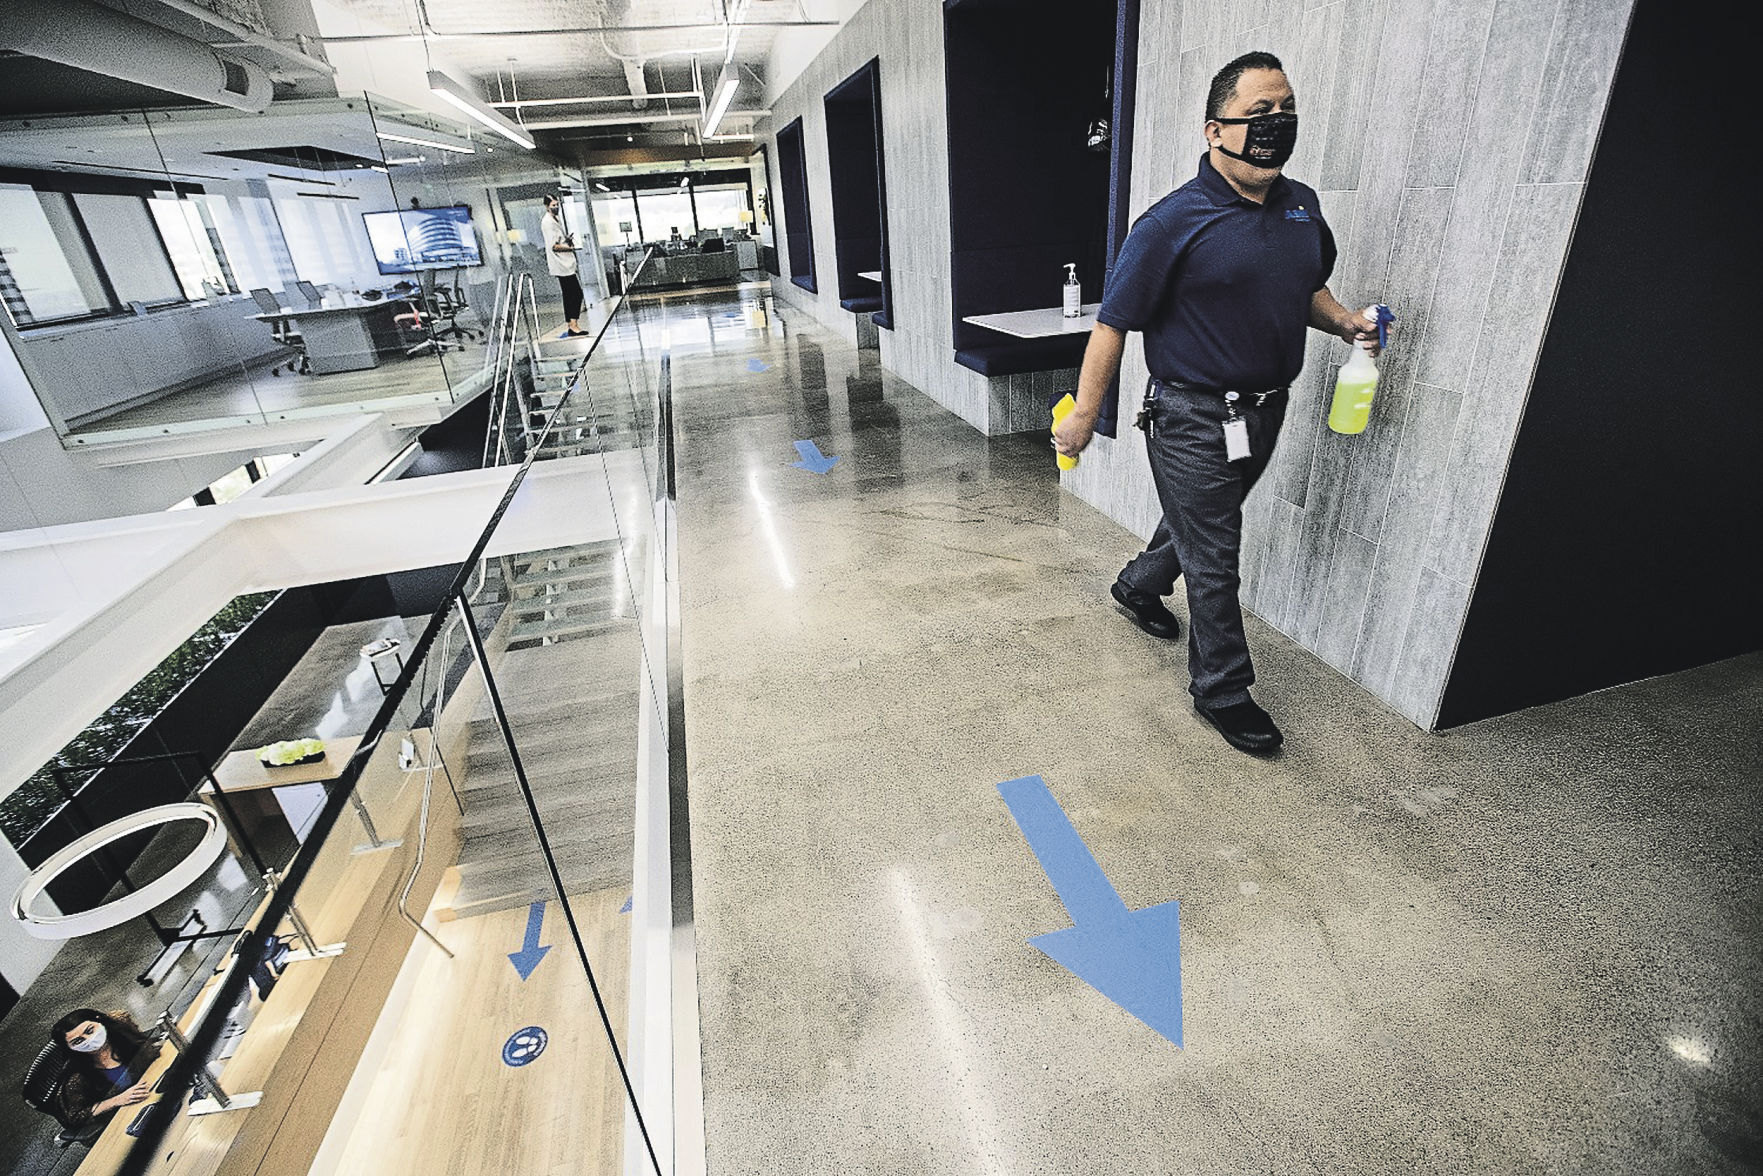 Saul Mendoza, with building maintenance, walks with disinfectant while cleaning a common area at Hudson Pacific Properties, a big office landlord on Wilshire Boulevard in Los Angeles. Arrows taped on the floor are to maintain one-way foot traffic to guard against the spread of the coronavirus.    PHOTO CREDIT: Mel Melcon